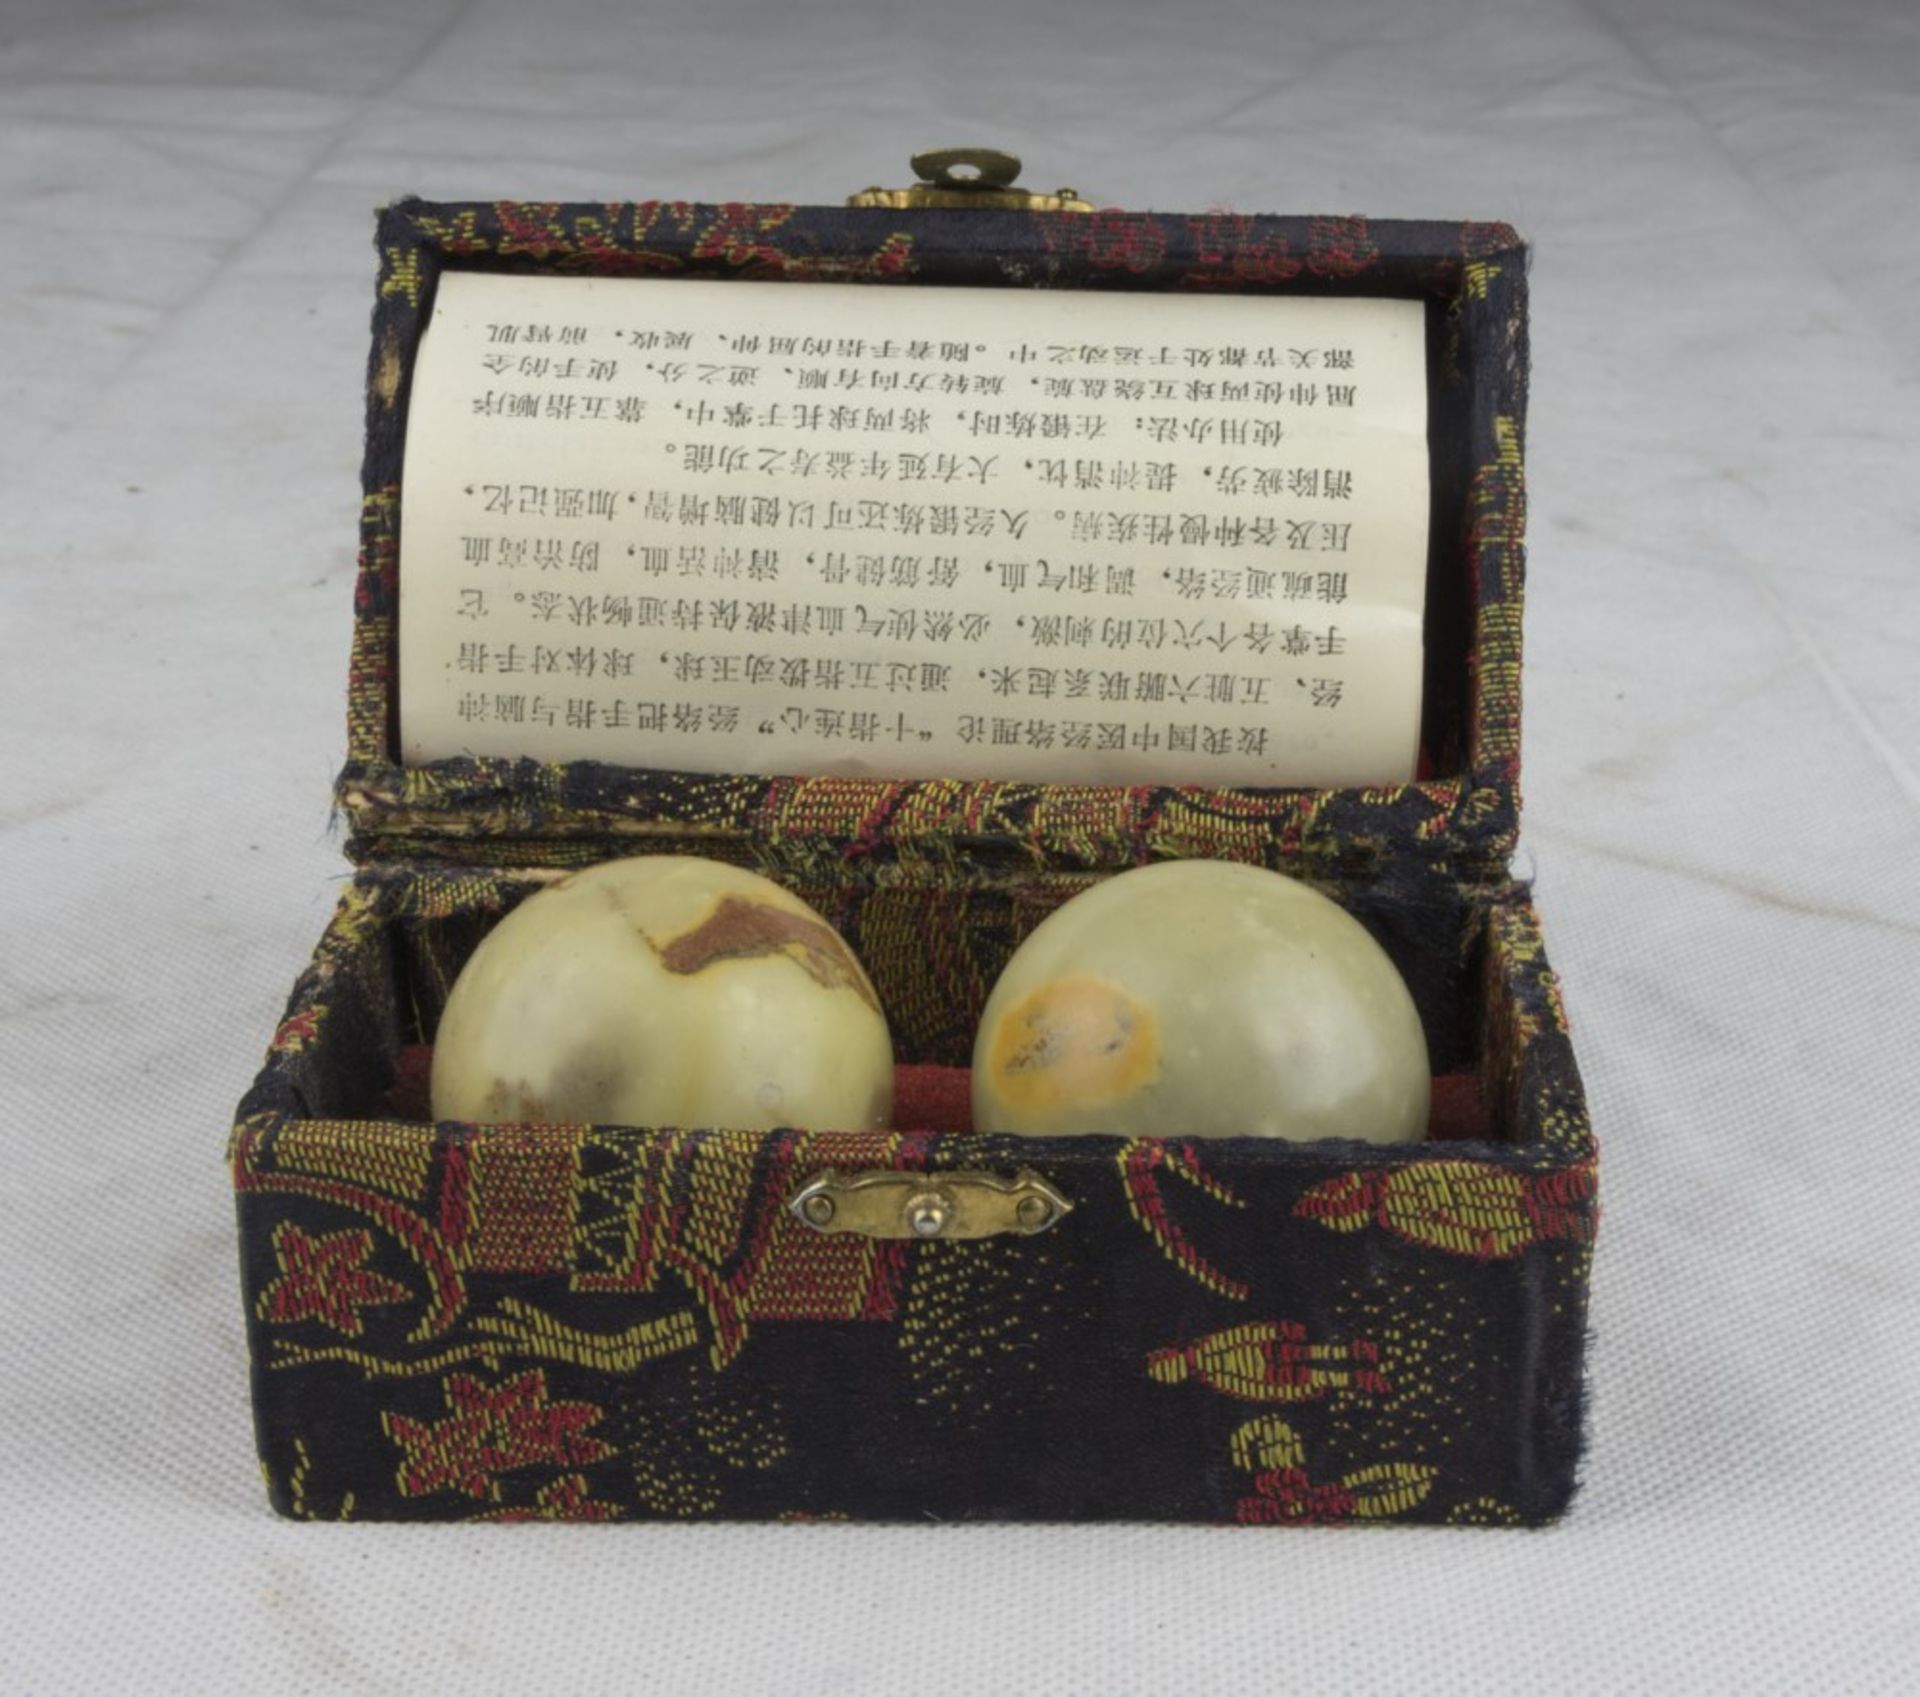 A pair of Chinese hard stone spheres. 20th century. In case. Measures case cm. 6 x 12 x 7. DUE